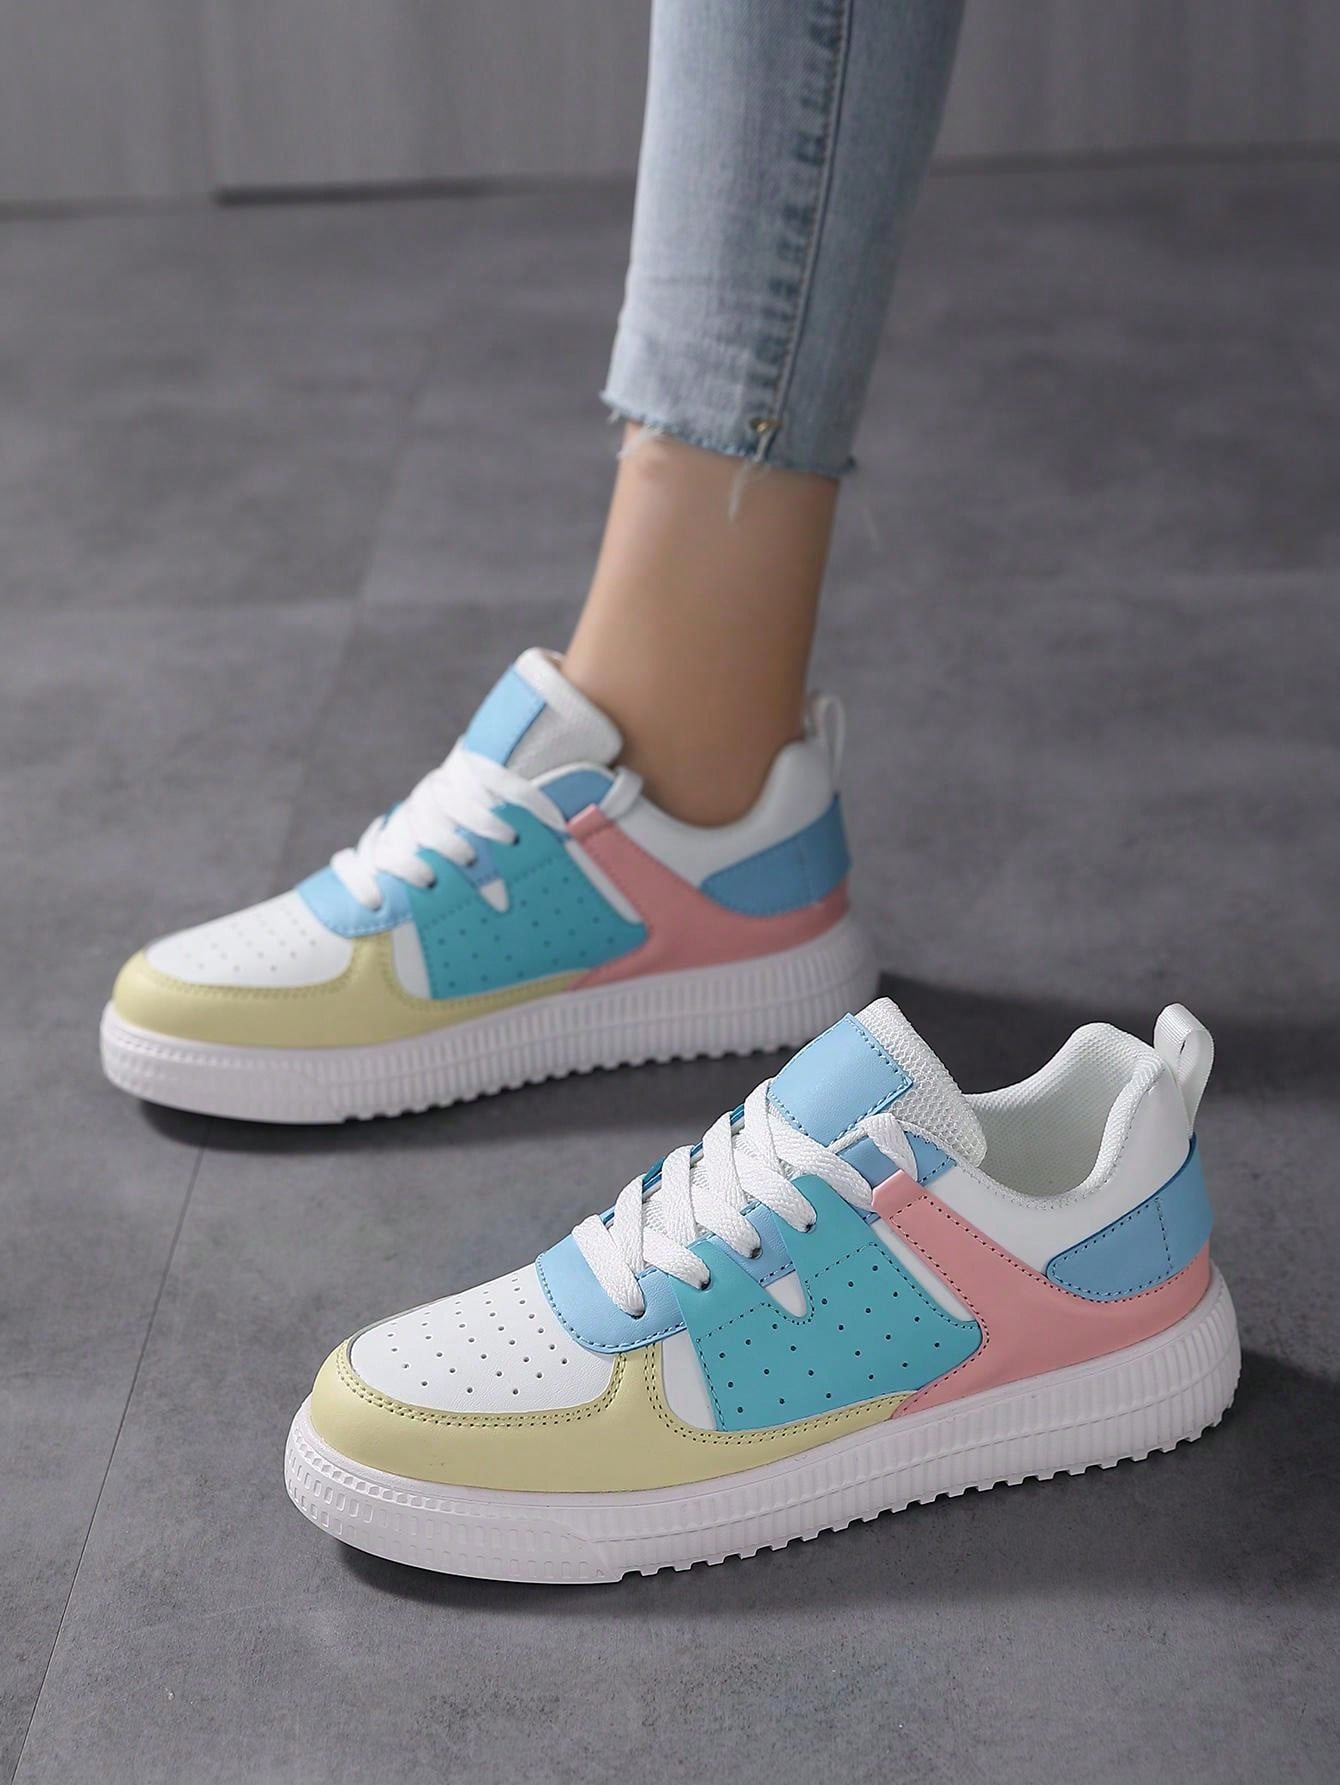 Fashionable Women Sports Shoes, Minimalist Style Classic White Casual Skate Shoes, Solid Color Daily All-Matching Round Toe Thick-Soled Height Increasing Outdoor Hiking Sneakers-Blue and White-11